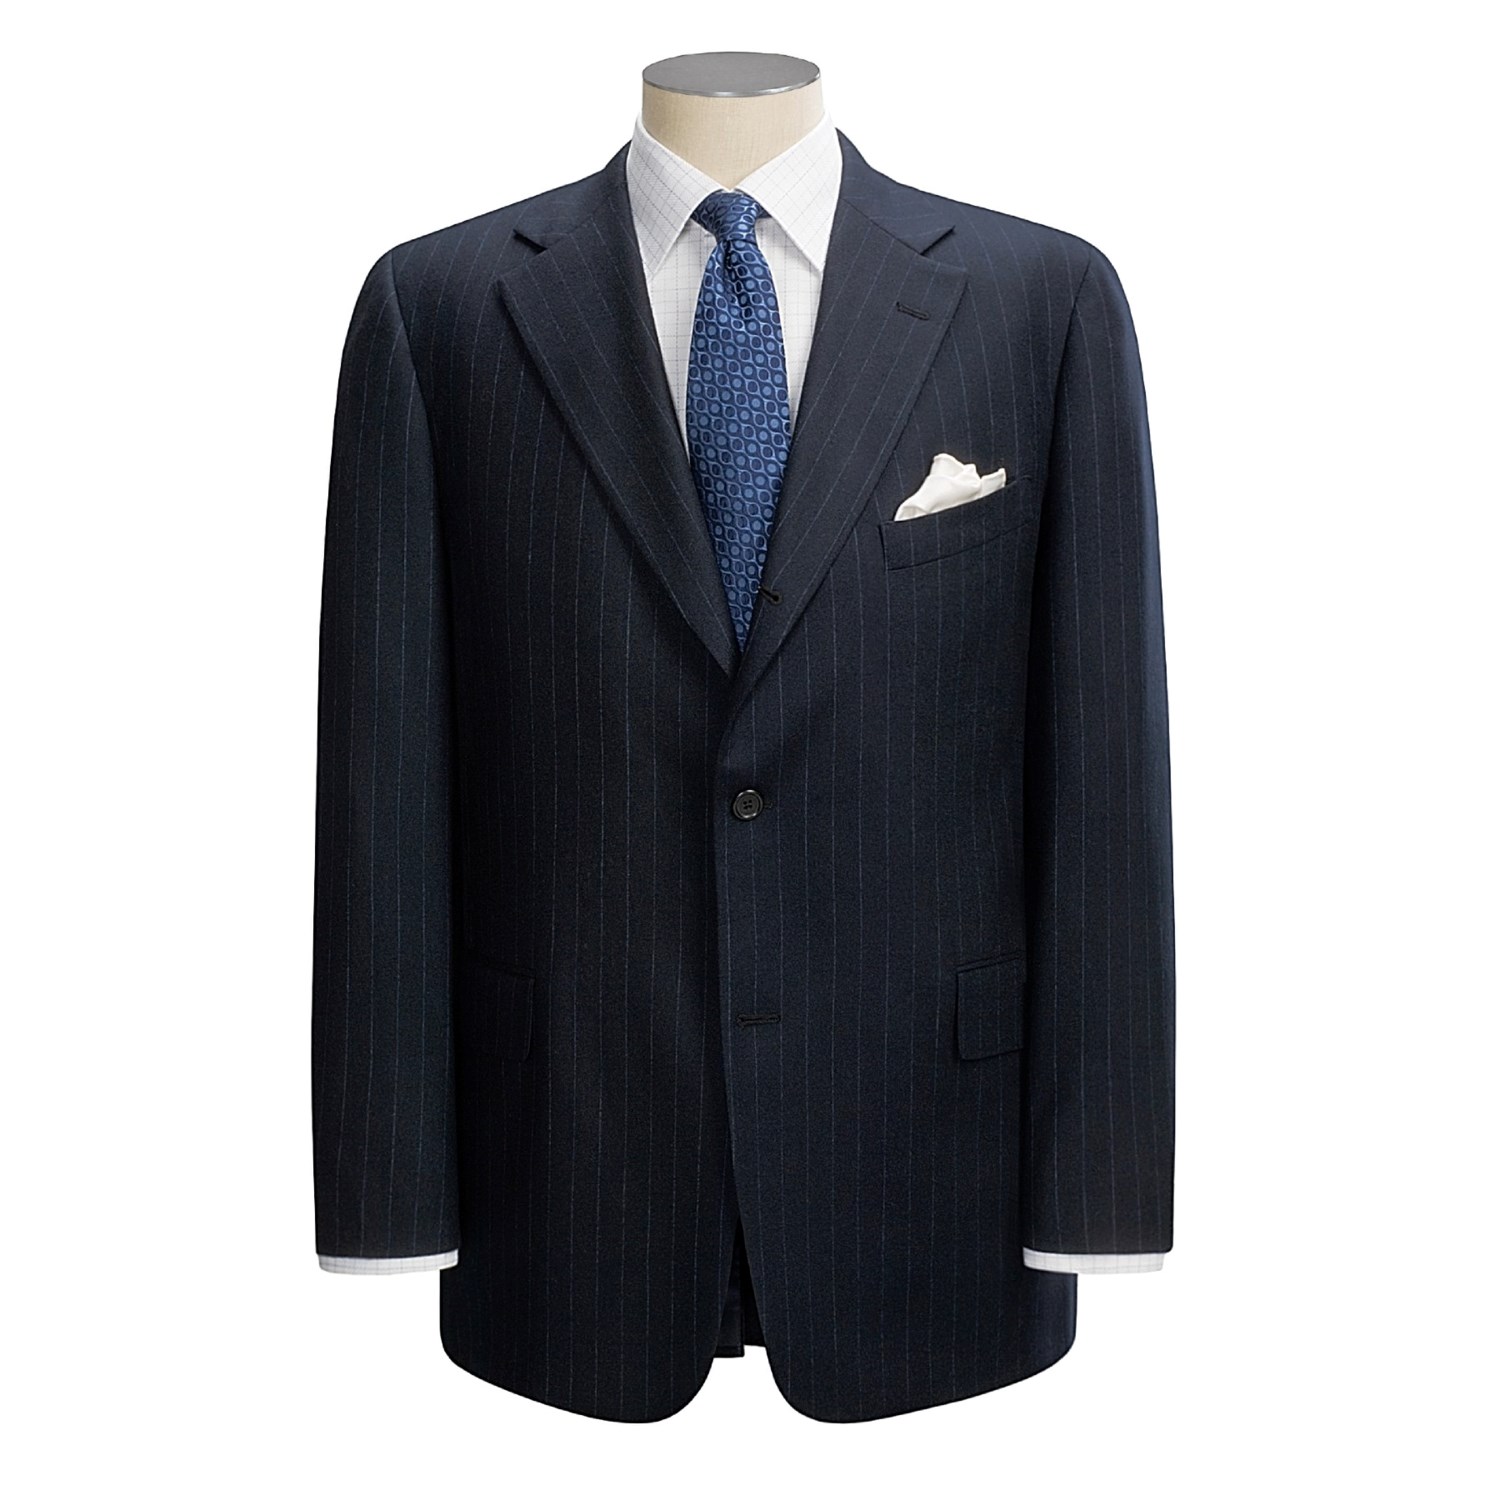 Southwick Flannel Pinstripe Sack Suit (For Men) 59349 - Save 54%